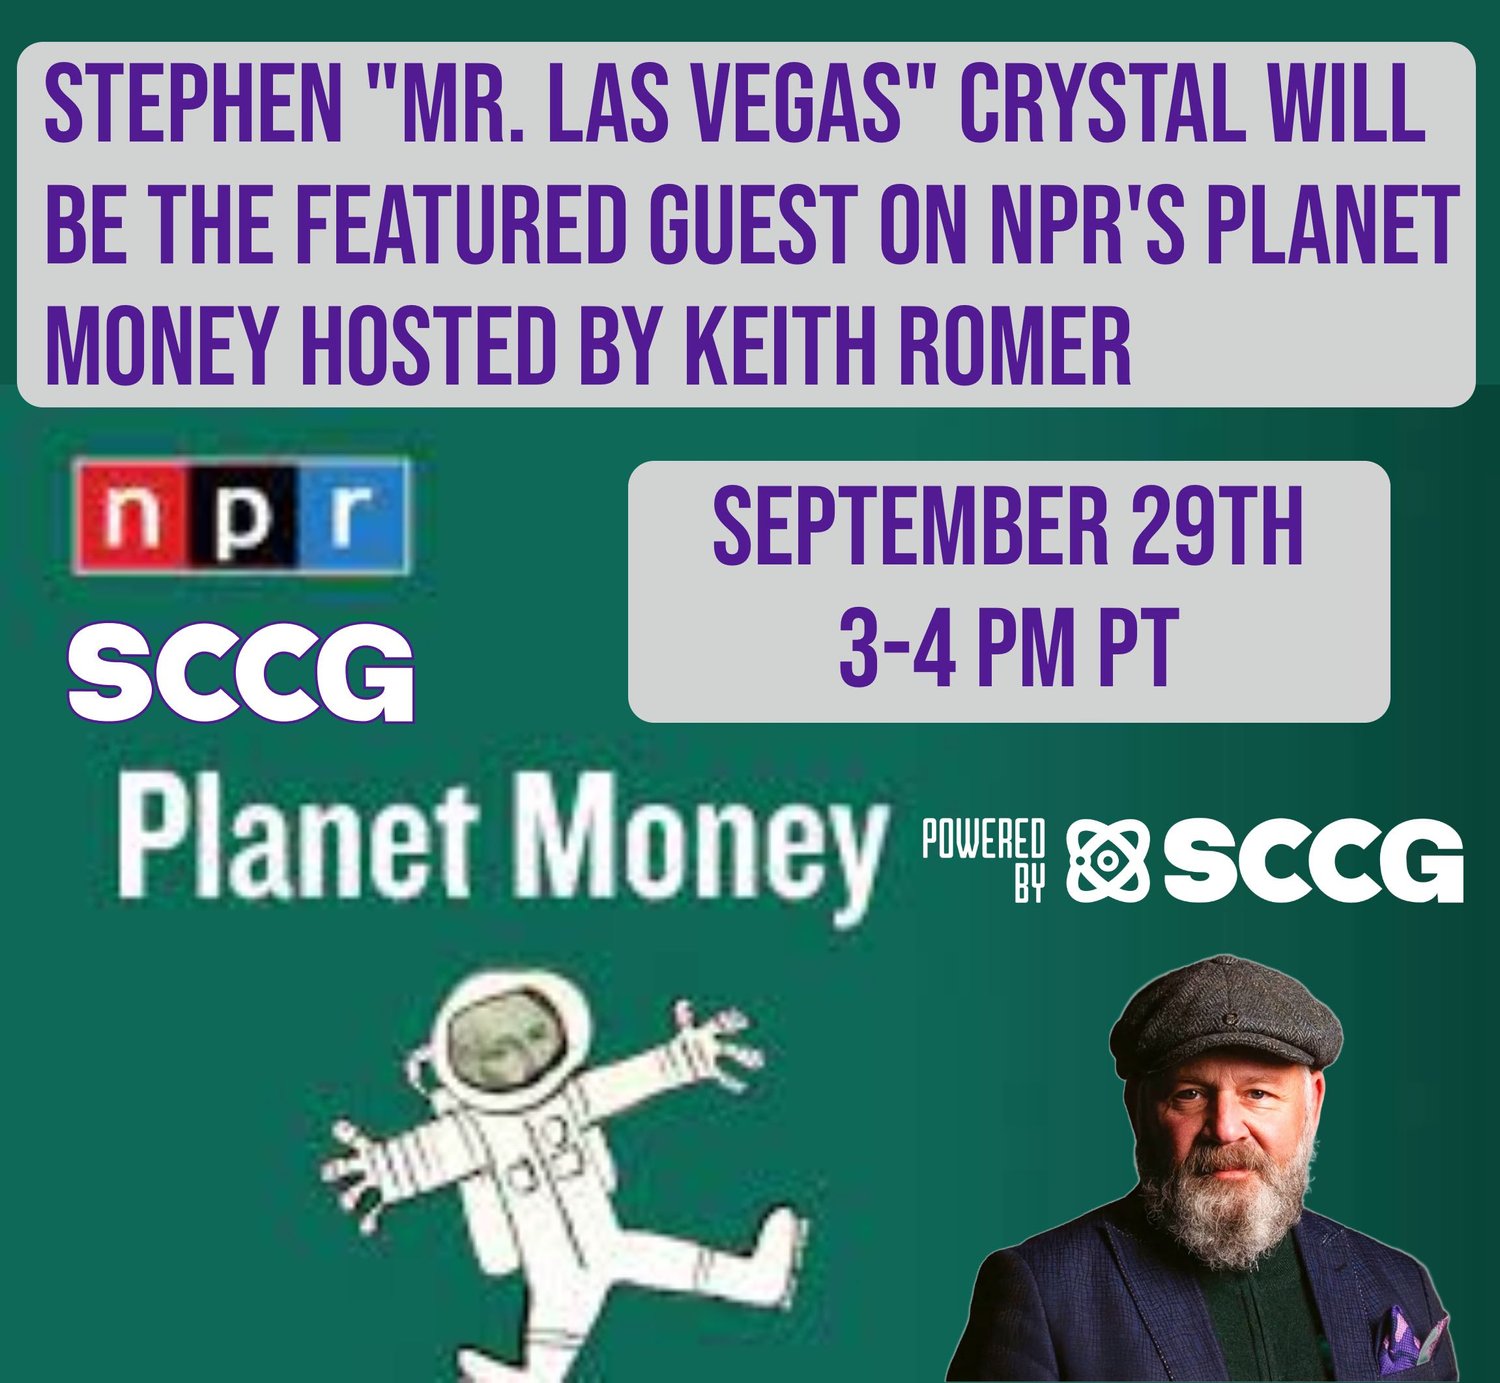 stephen-“mr.-las-vegas”-crystal-will-be-the-featured-guest-on-npr’s-planet-money-hosted-by-keith-romer